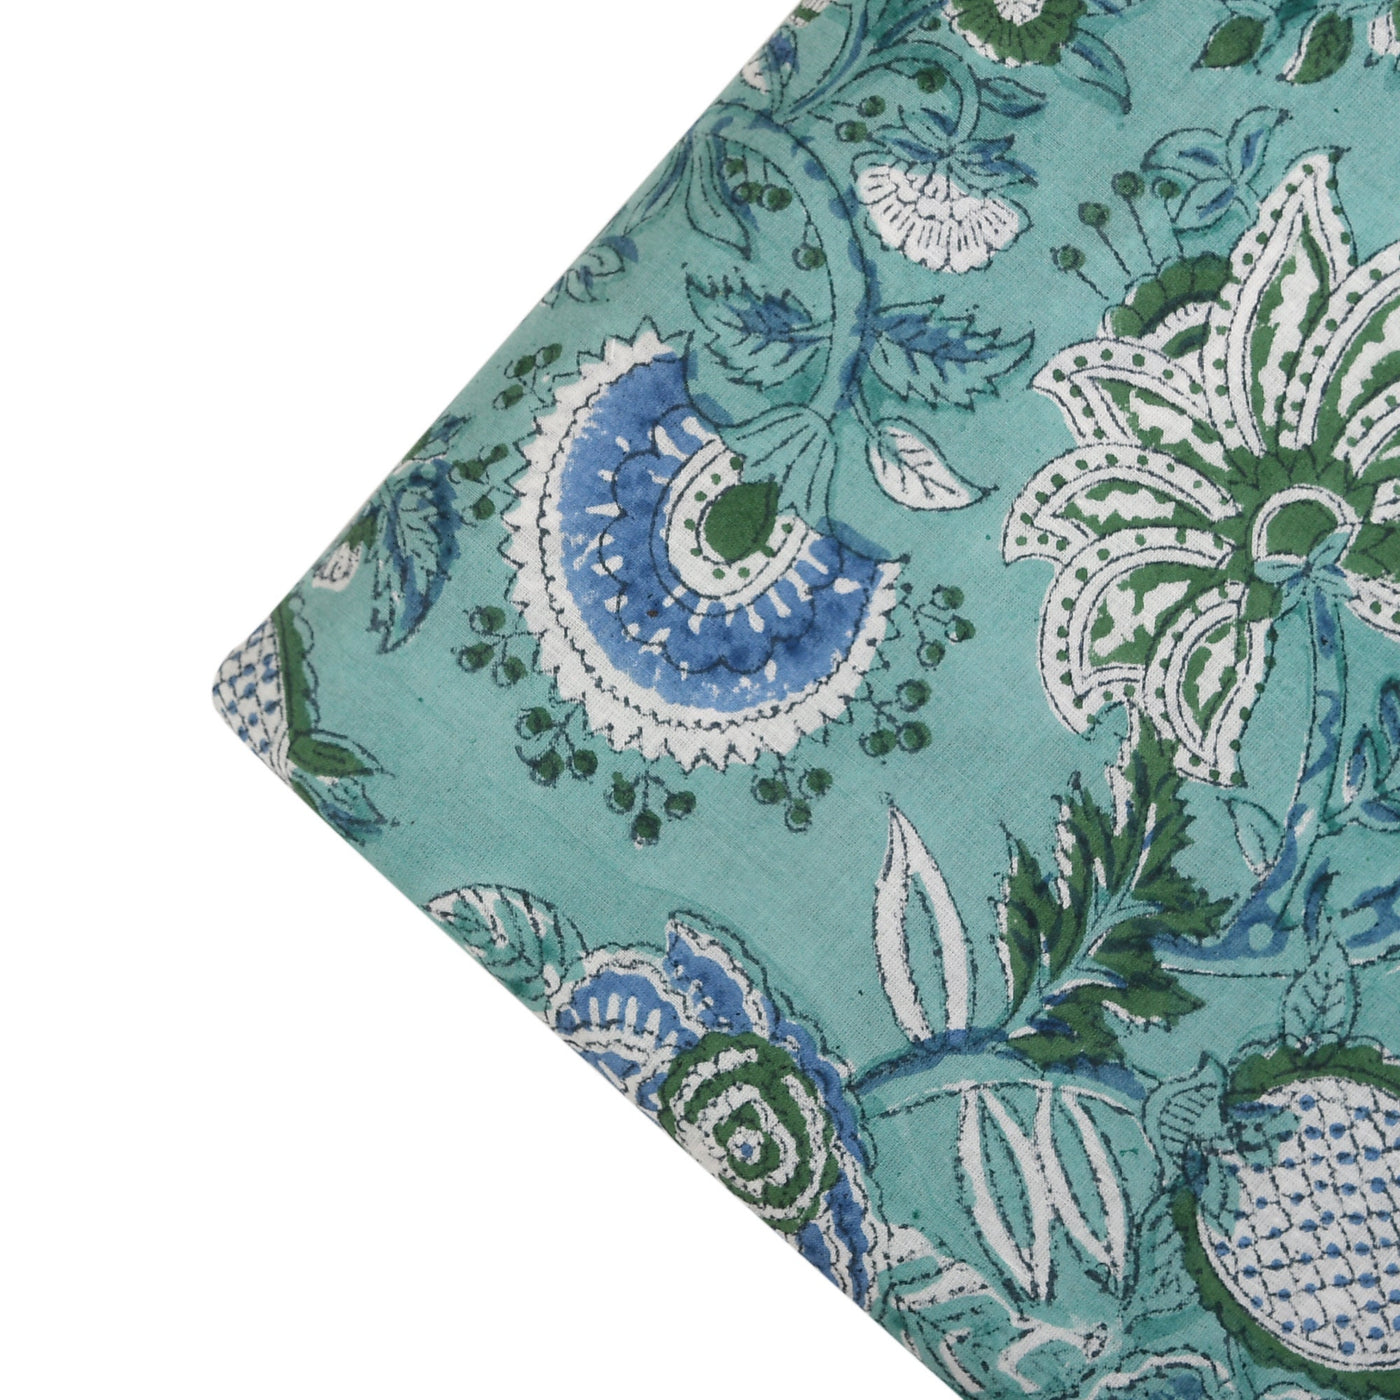 Fabricrush Sapphire and Yale Blue Indian Floral Hand Block Printed 100% Pure Cotton Cloth, Fabric by the yard, Women's Clothing Duvet Covers Pillow Bag